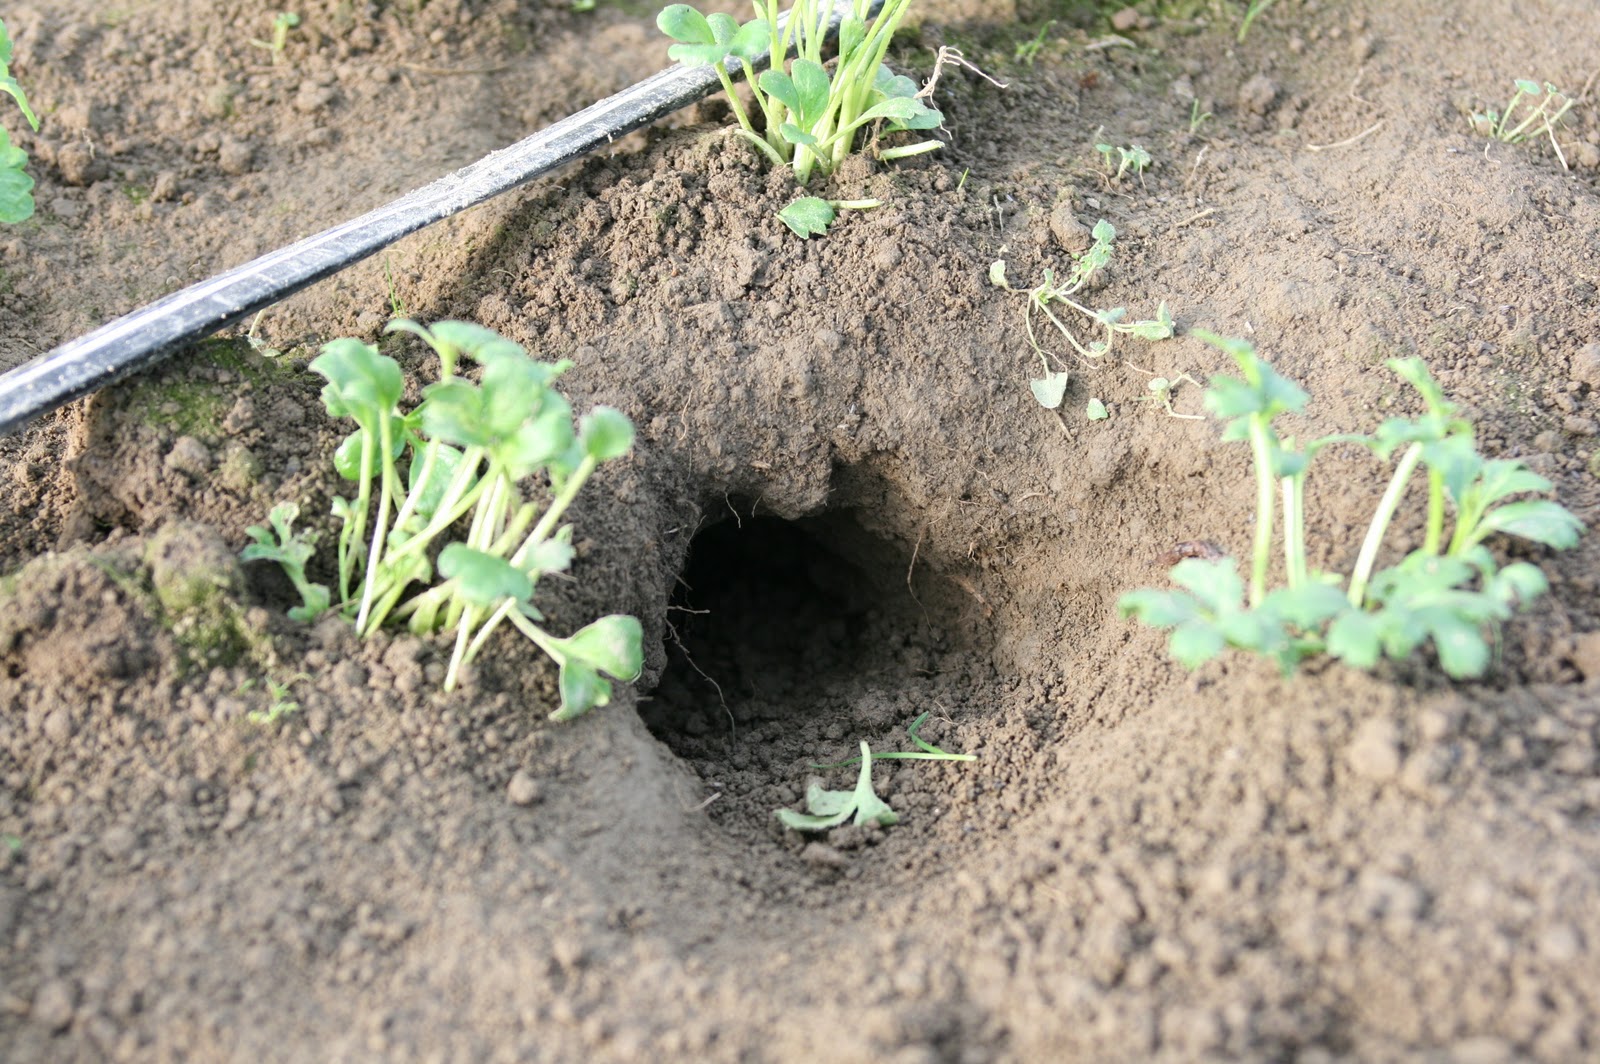 A rodent burrow